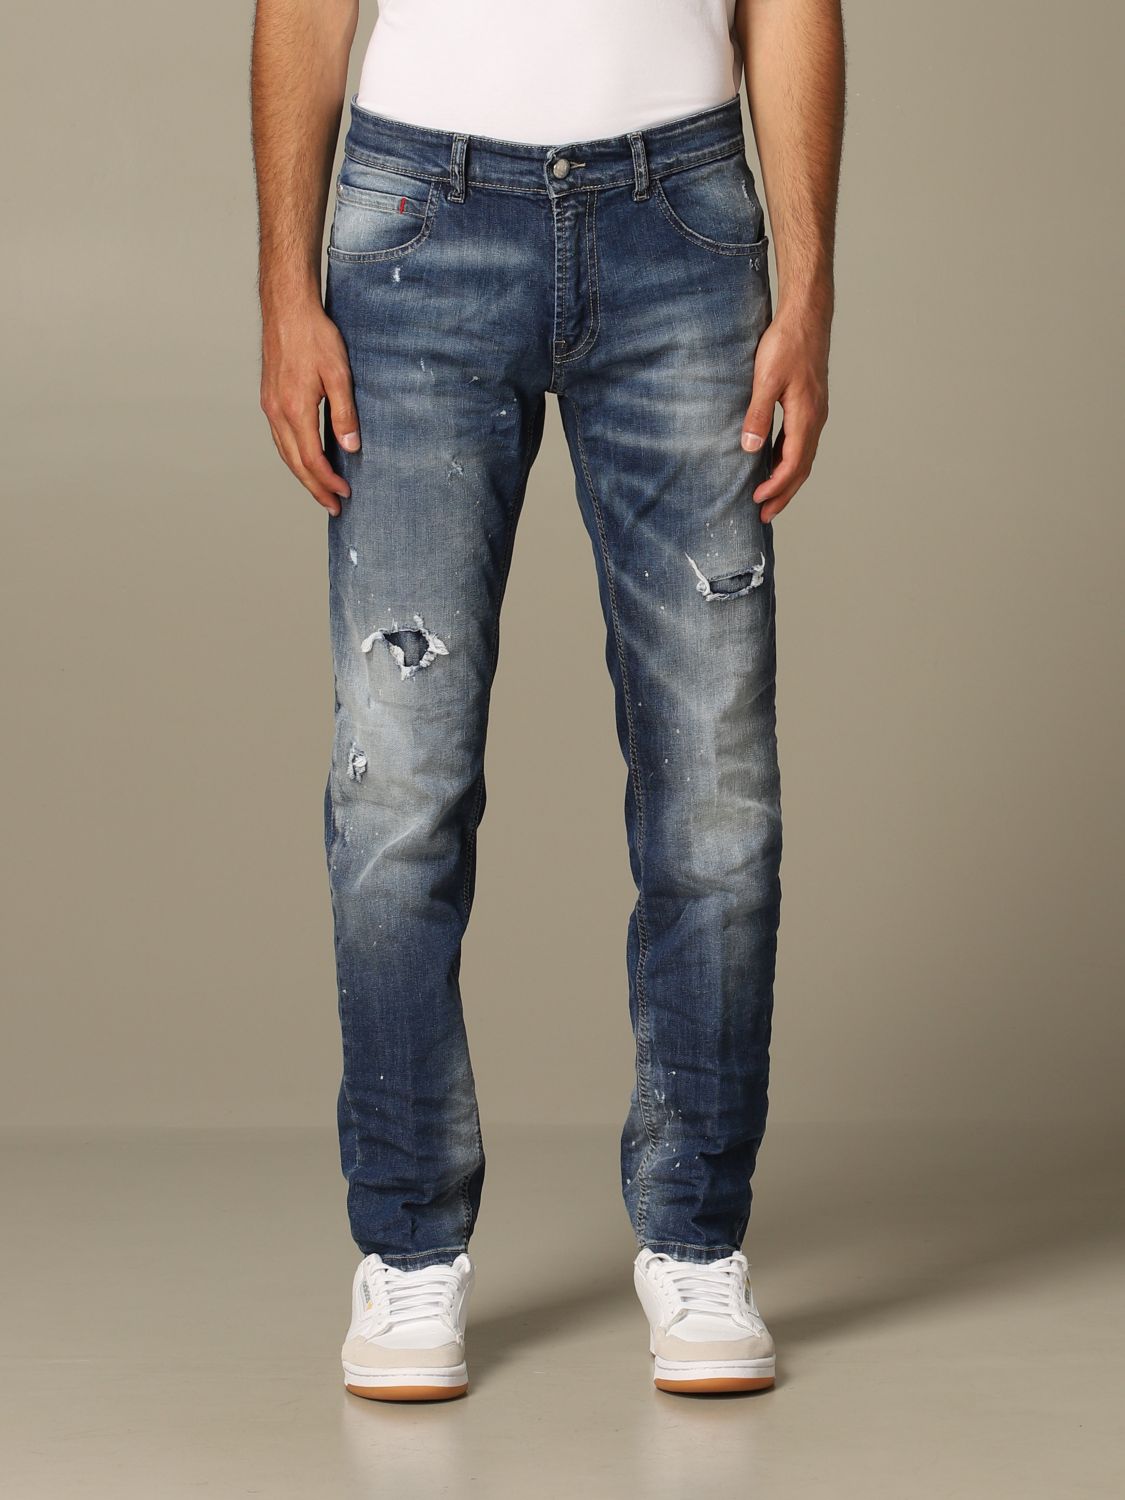 Frankie Morello Outlet: Regular fit jeans with tears - Stone Washed ...